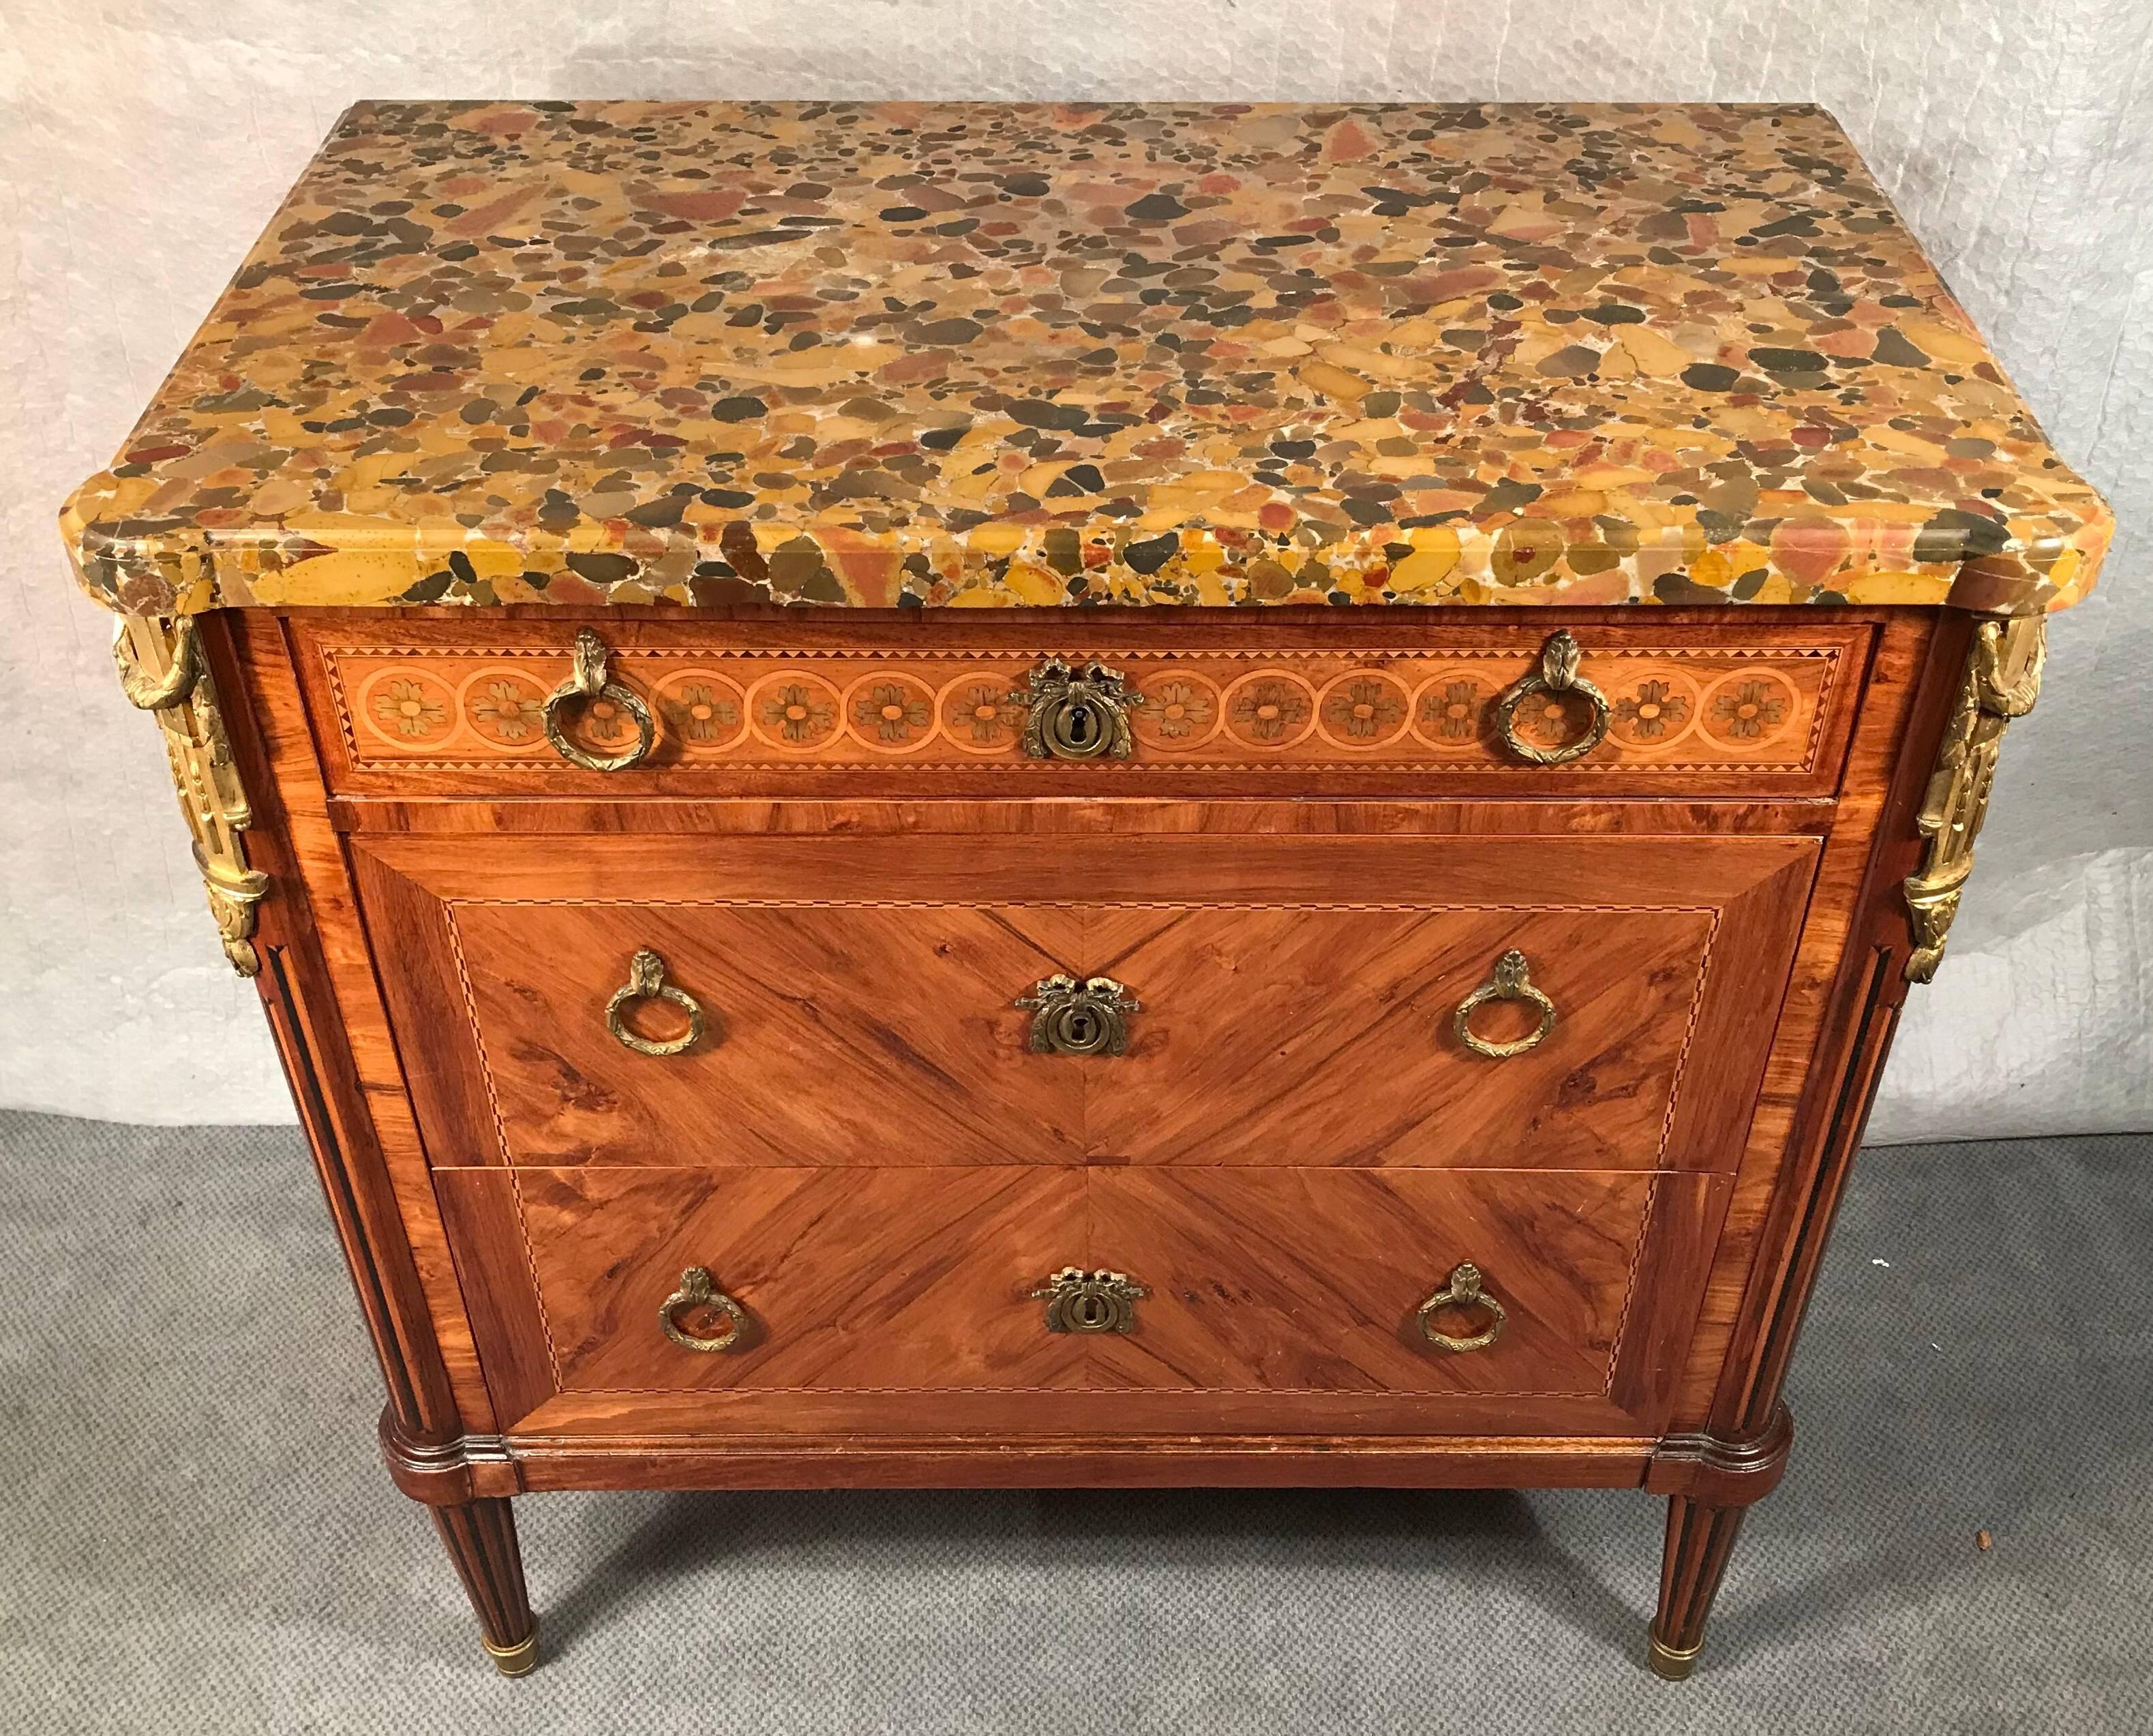 Unique Transition commode, France, circa 1820. Plum veneer with beautiful marquetry in satinwood and ebony. With a marble top, a so called “Breche d’Alep” top. The commode is in very good condition. It will be shipped from Germany. Shipping costs to